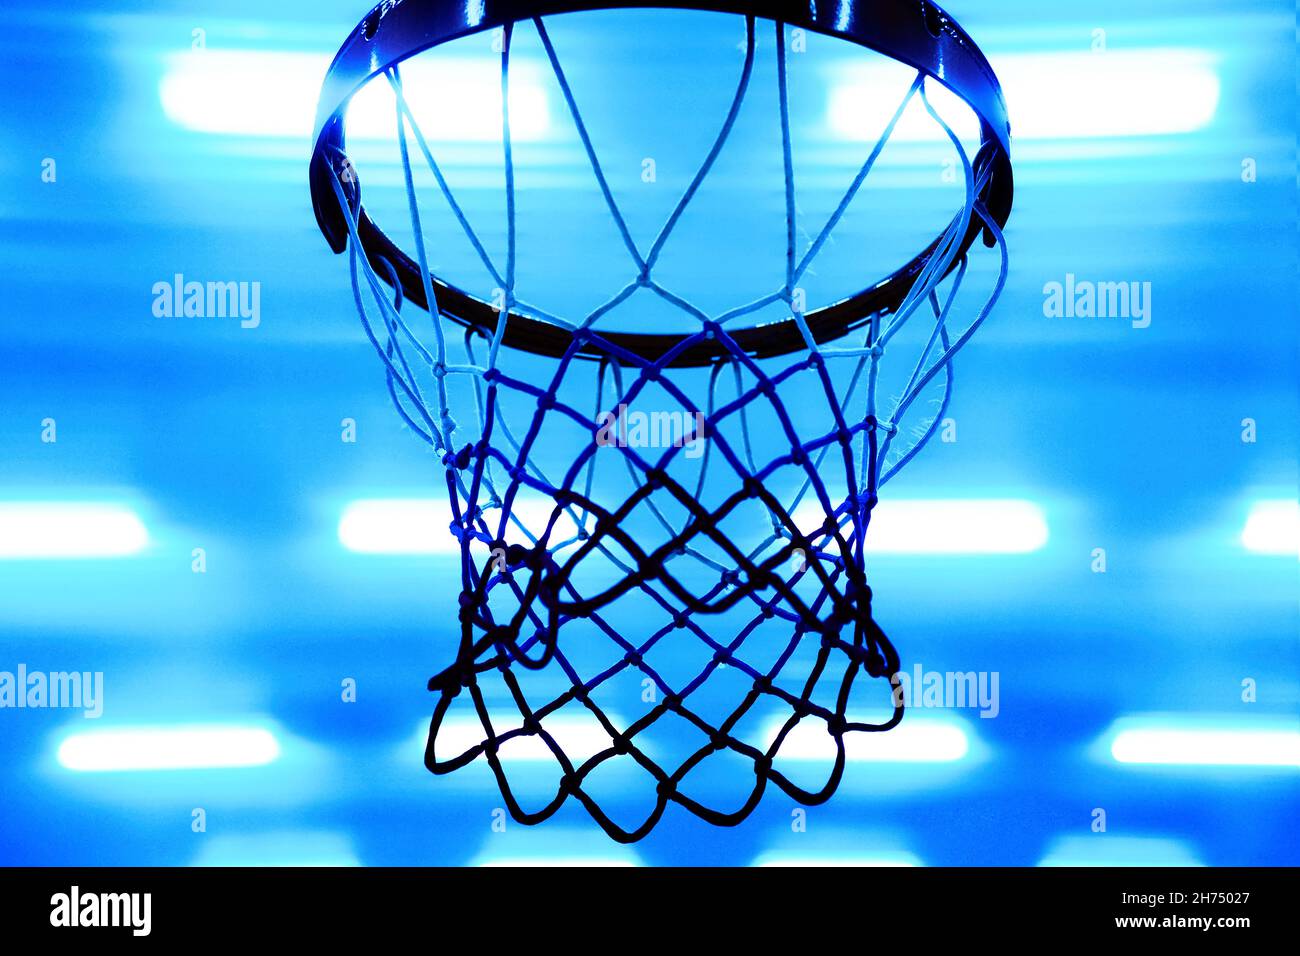 Basketball hoop against background of bright spotlights on ceiling. Bottom view. Sporty back. Blue Neon color. Stock Photo